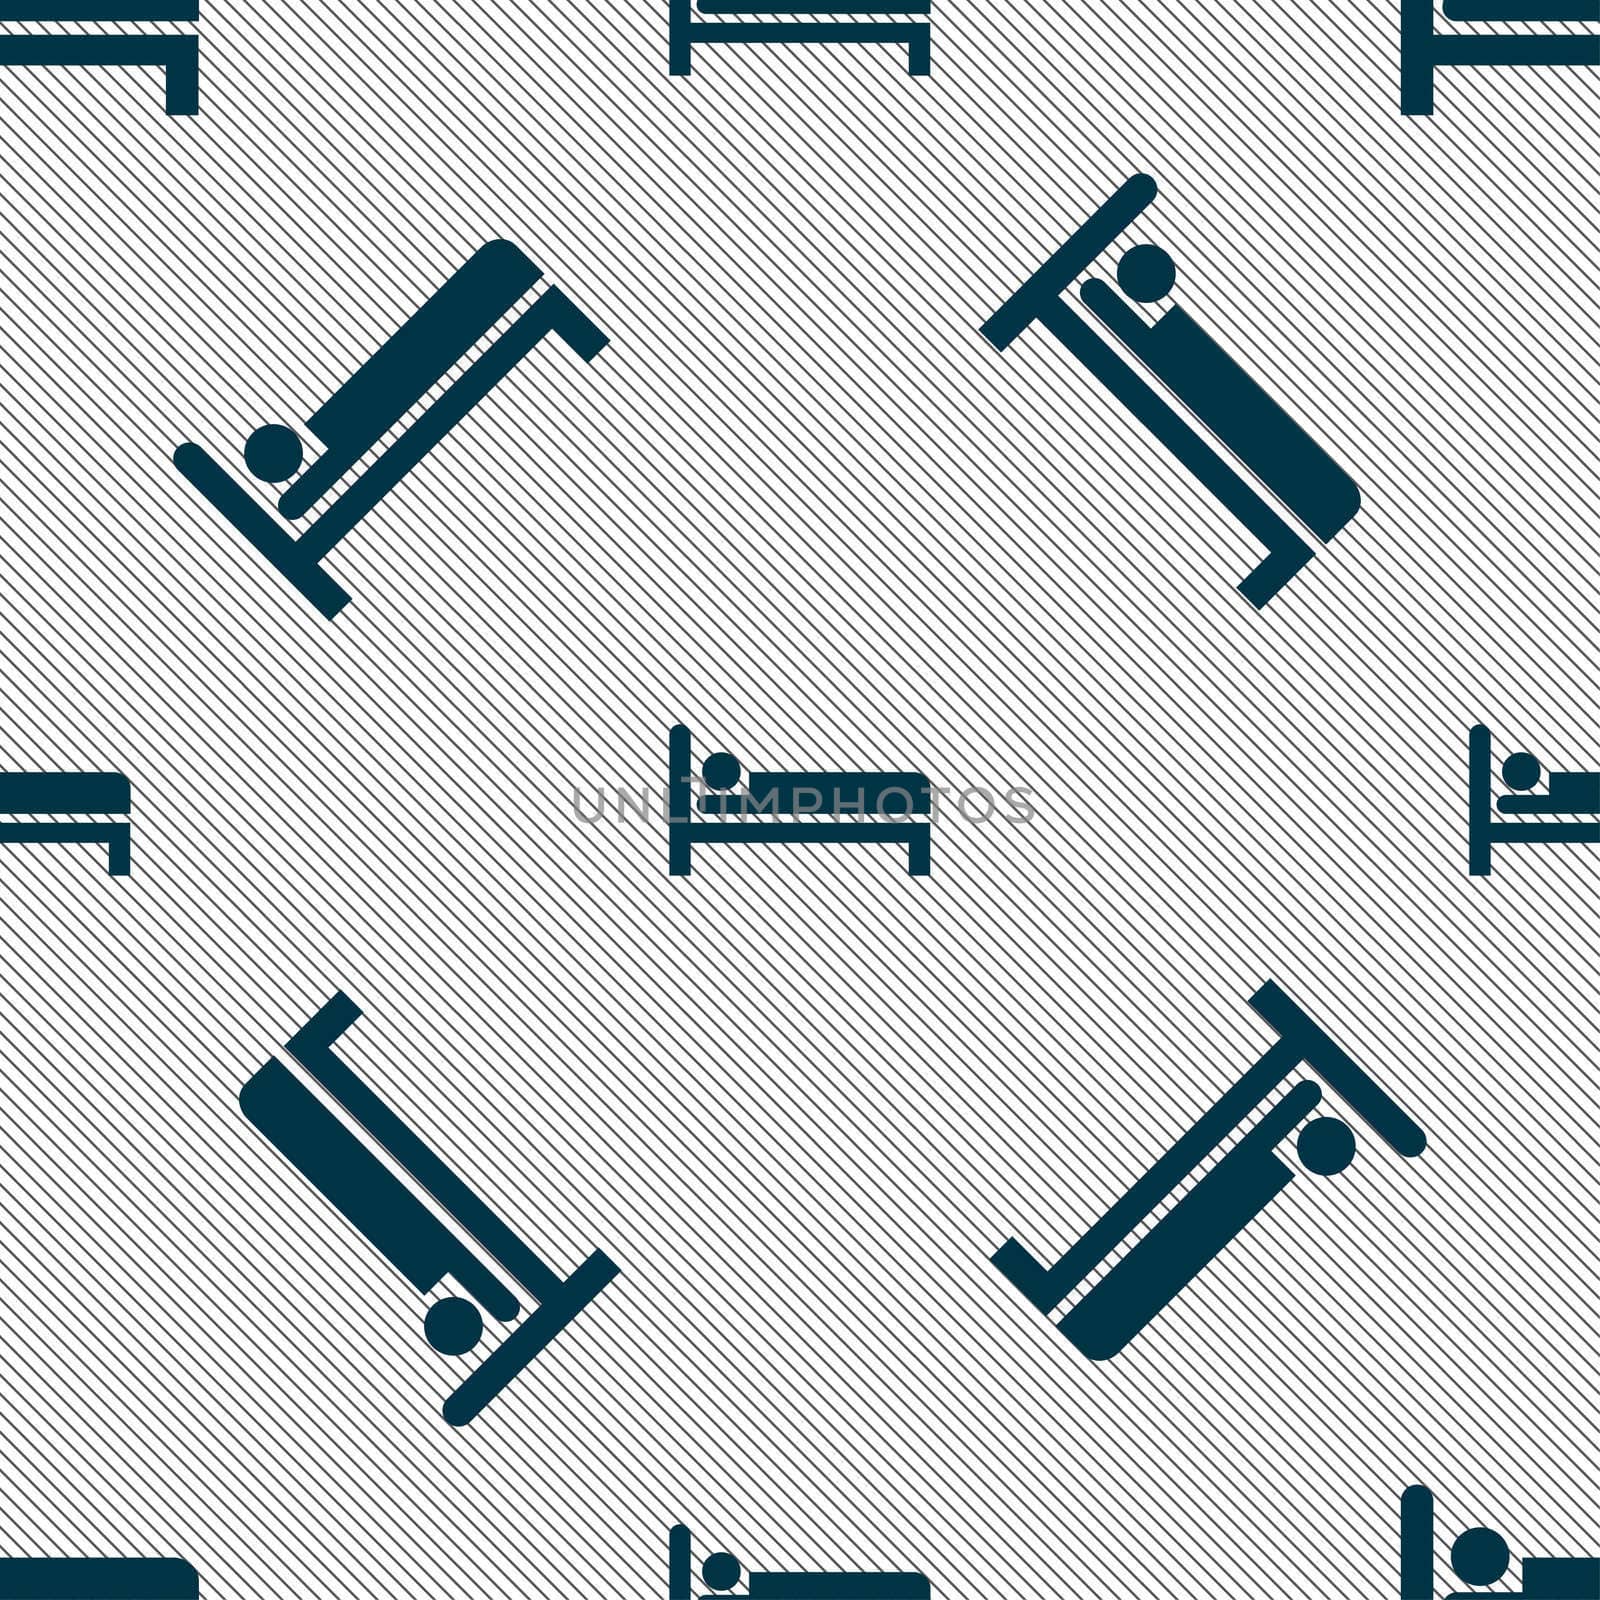 Hotel icon sign. Seamless pattern with geometric texture.  by serhii_lohvyniuk